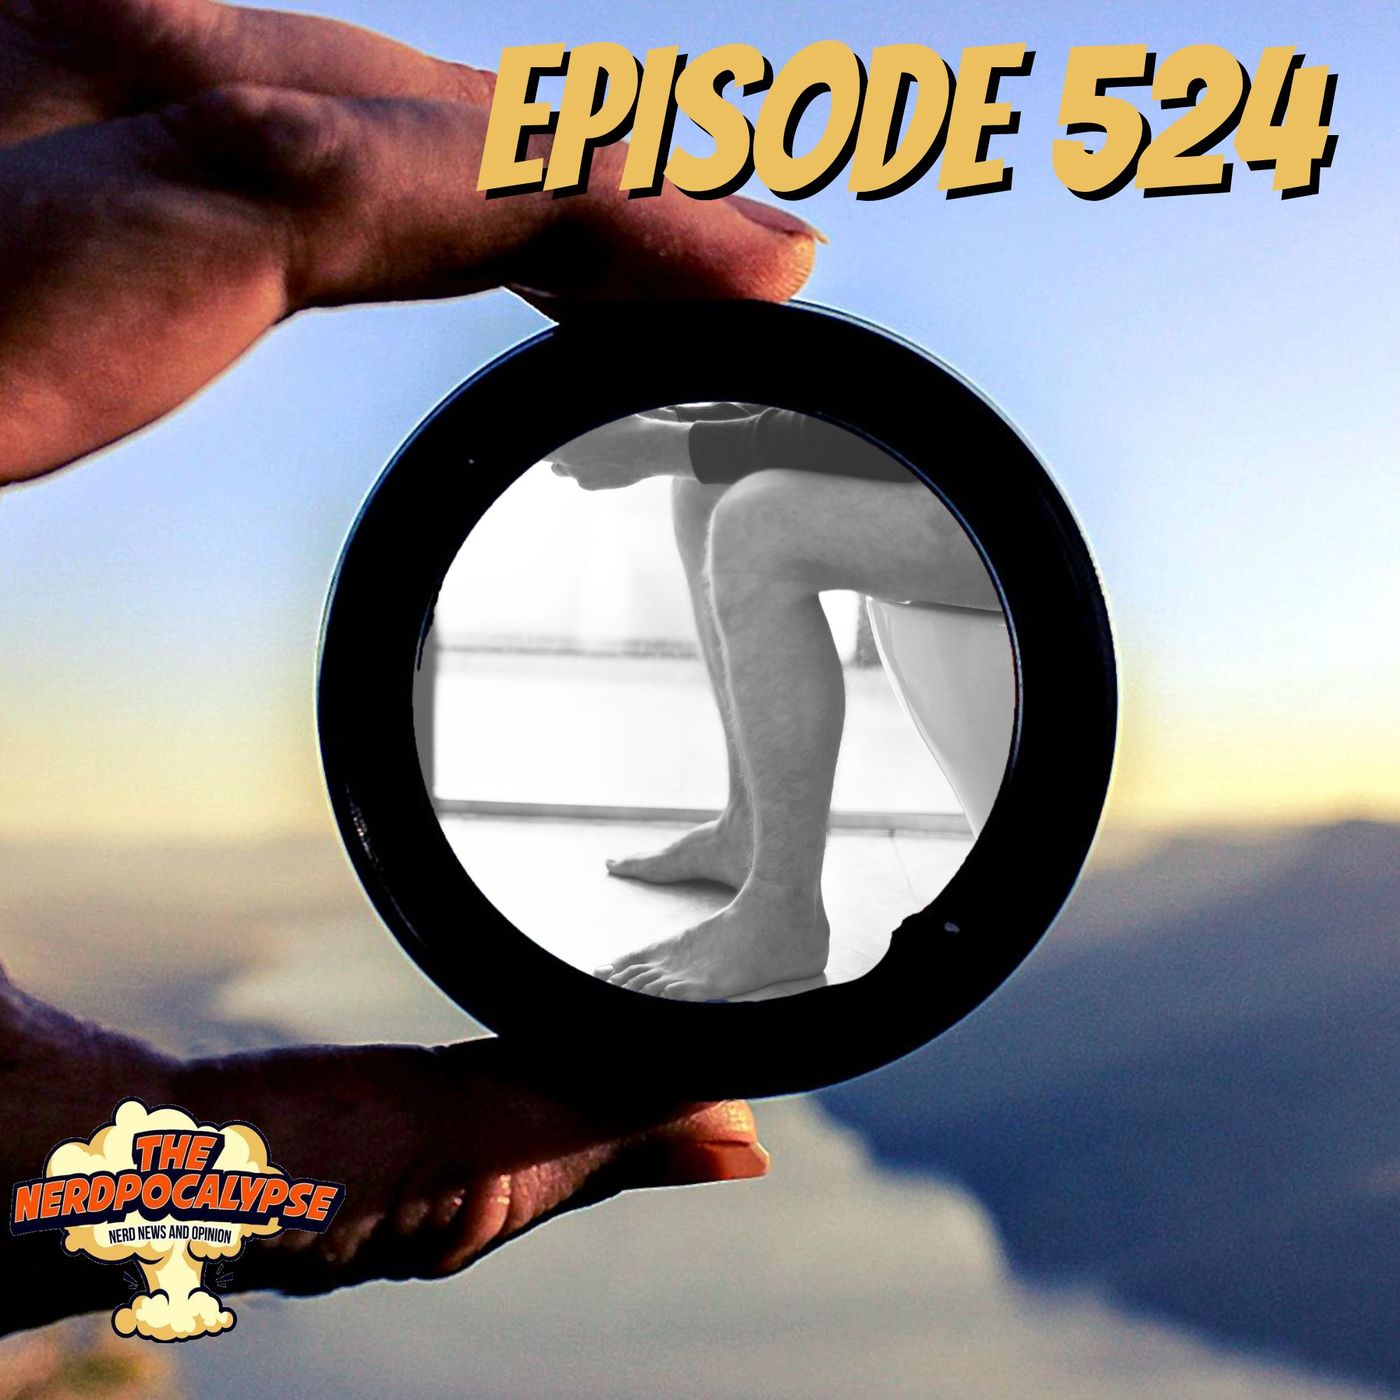 Episode 524: We Are Through the Looking Glass